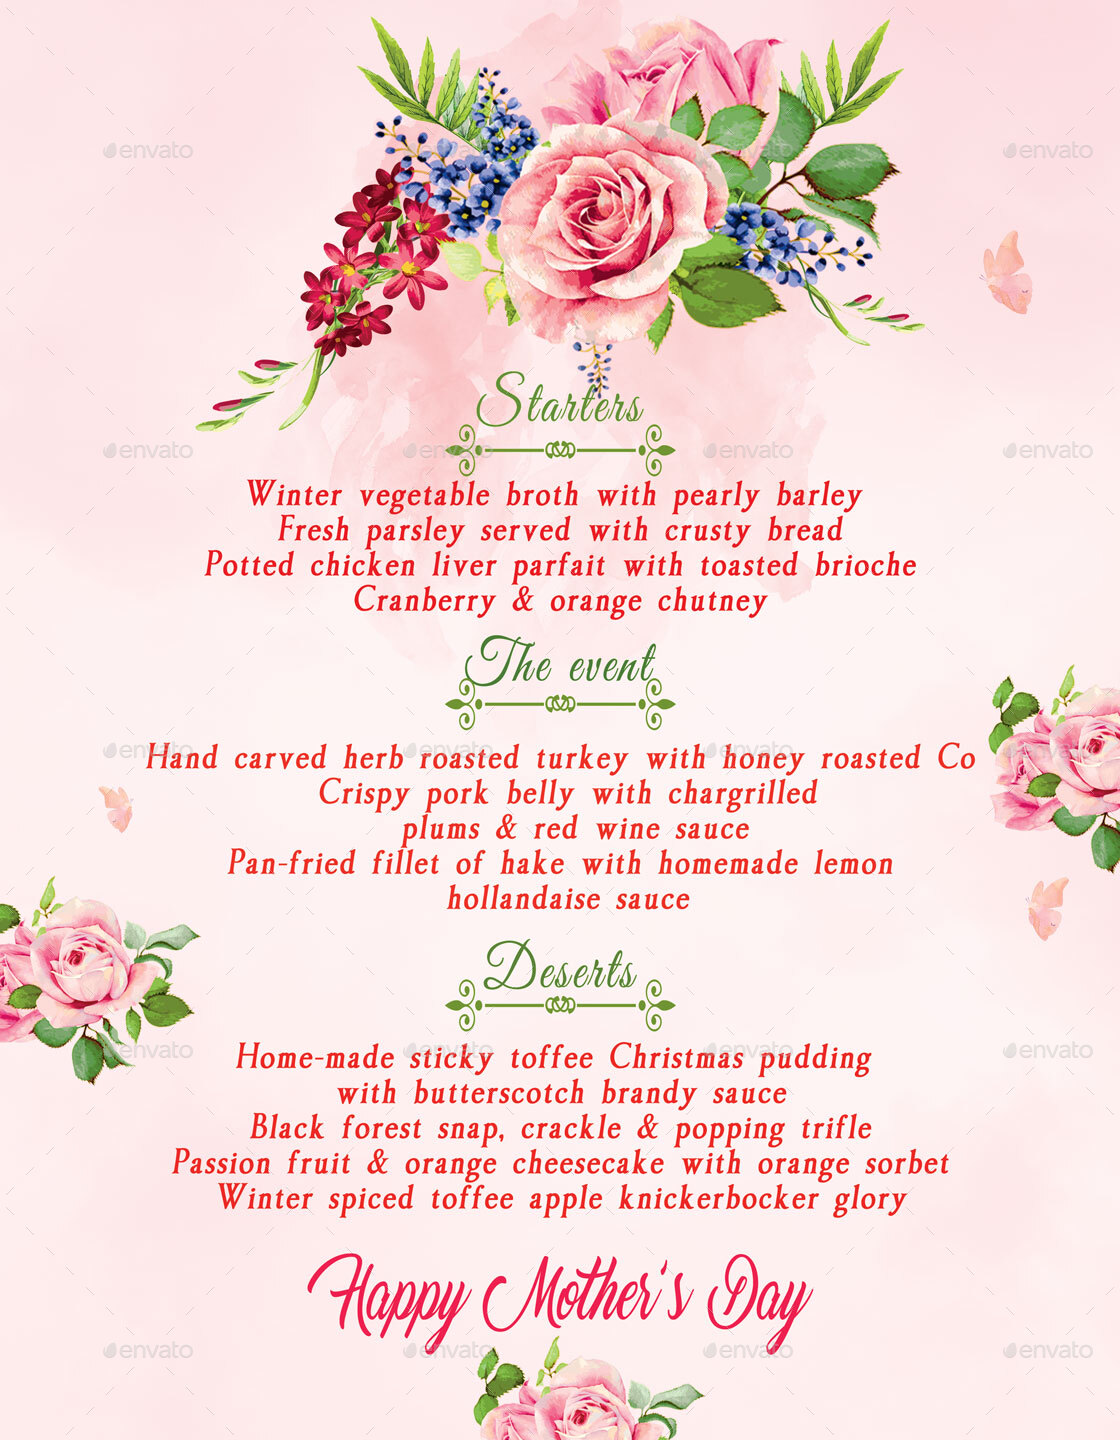 Mothers Day Menu by oloreon GraphicRiver